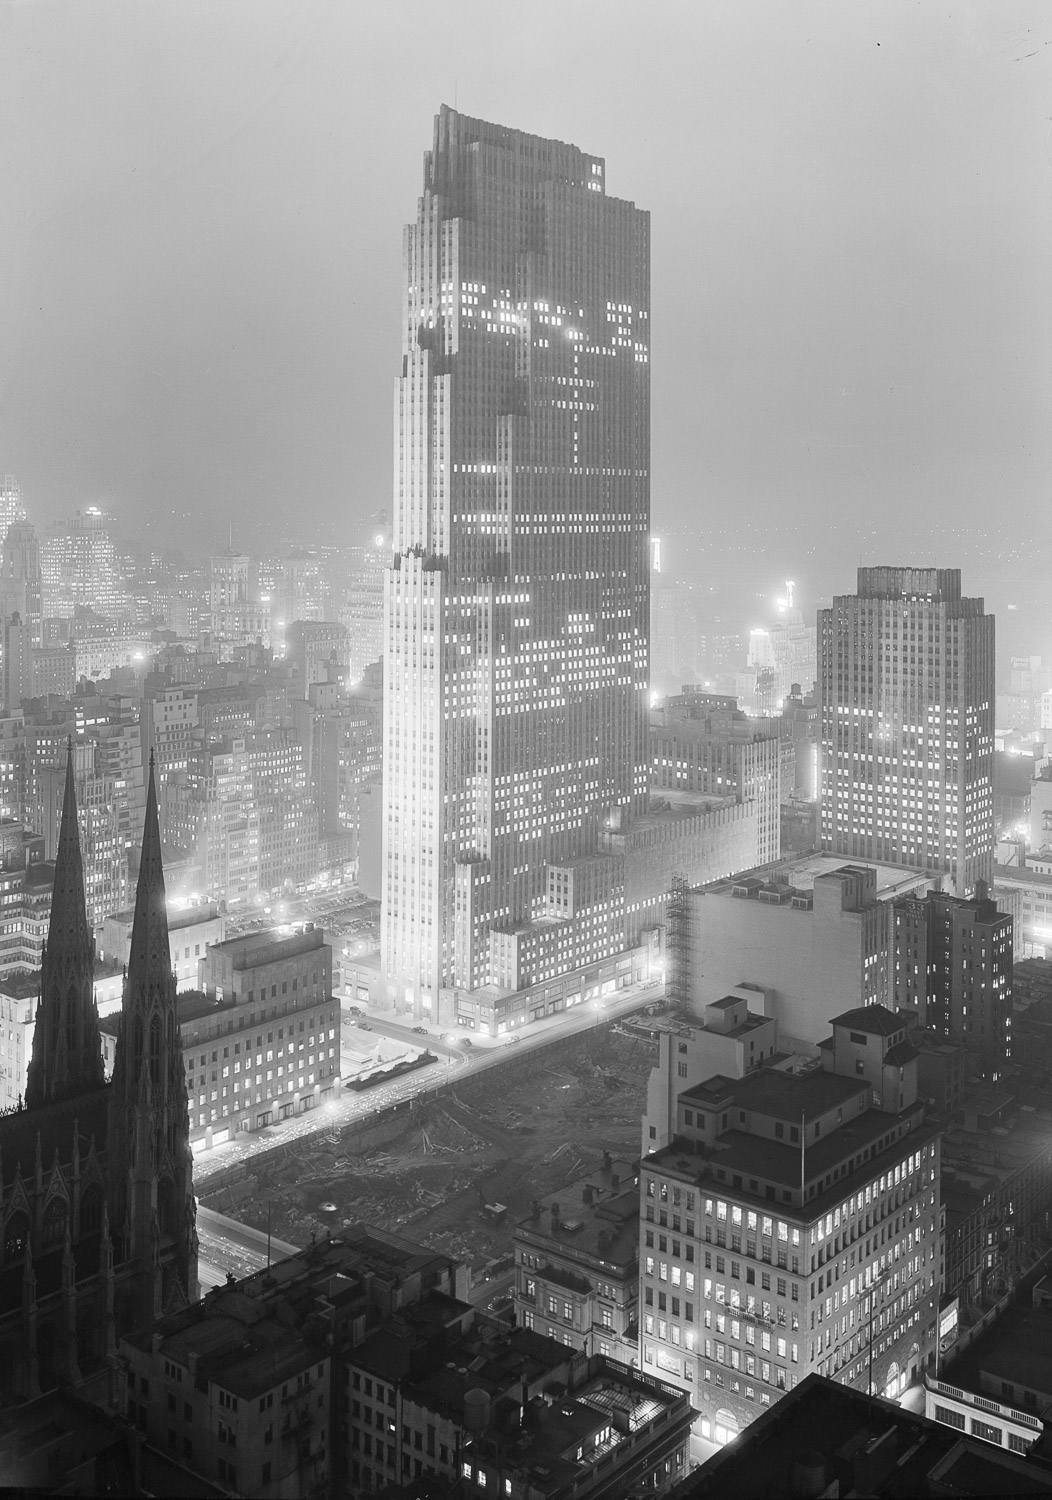 A black and white photograph taken at night from a high vantage point diagonally across from Rockefeller Center. The main central skyscraper (the RCA Building) is surrounded by the lower buildings of the project. The buildings are illuminated by floodlights from the exterior and a random assortment of the windows glow with light from the interior. The windows of other city buildings twinkle in the background and disappear into a gray haze. In the lower left foreground are the darkly silhouetted spires of Saint Patrick’s Cathedral.